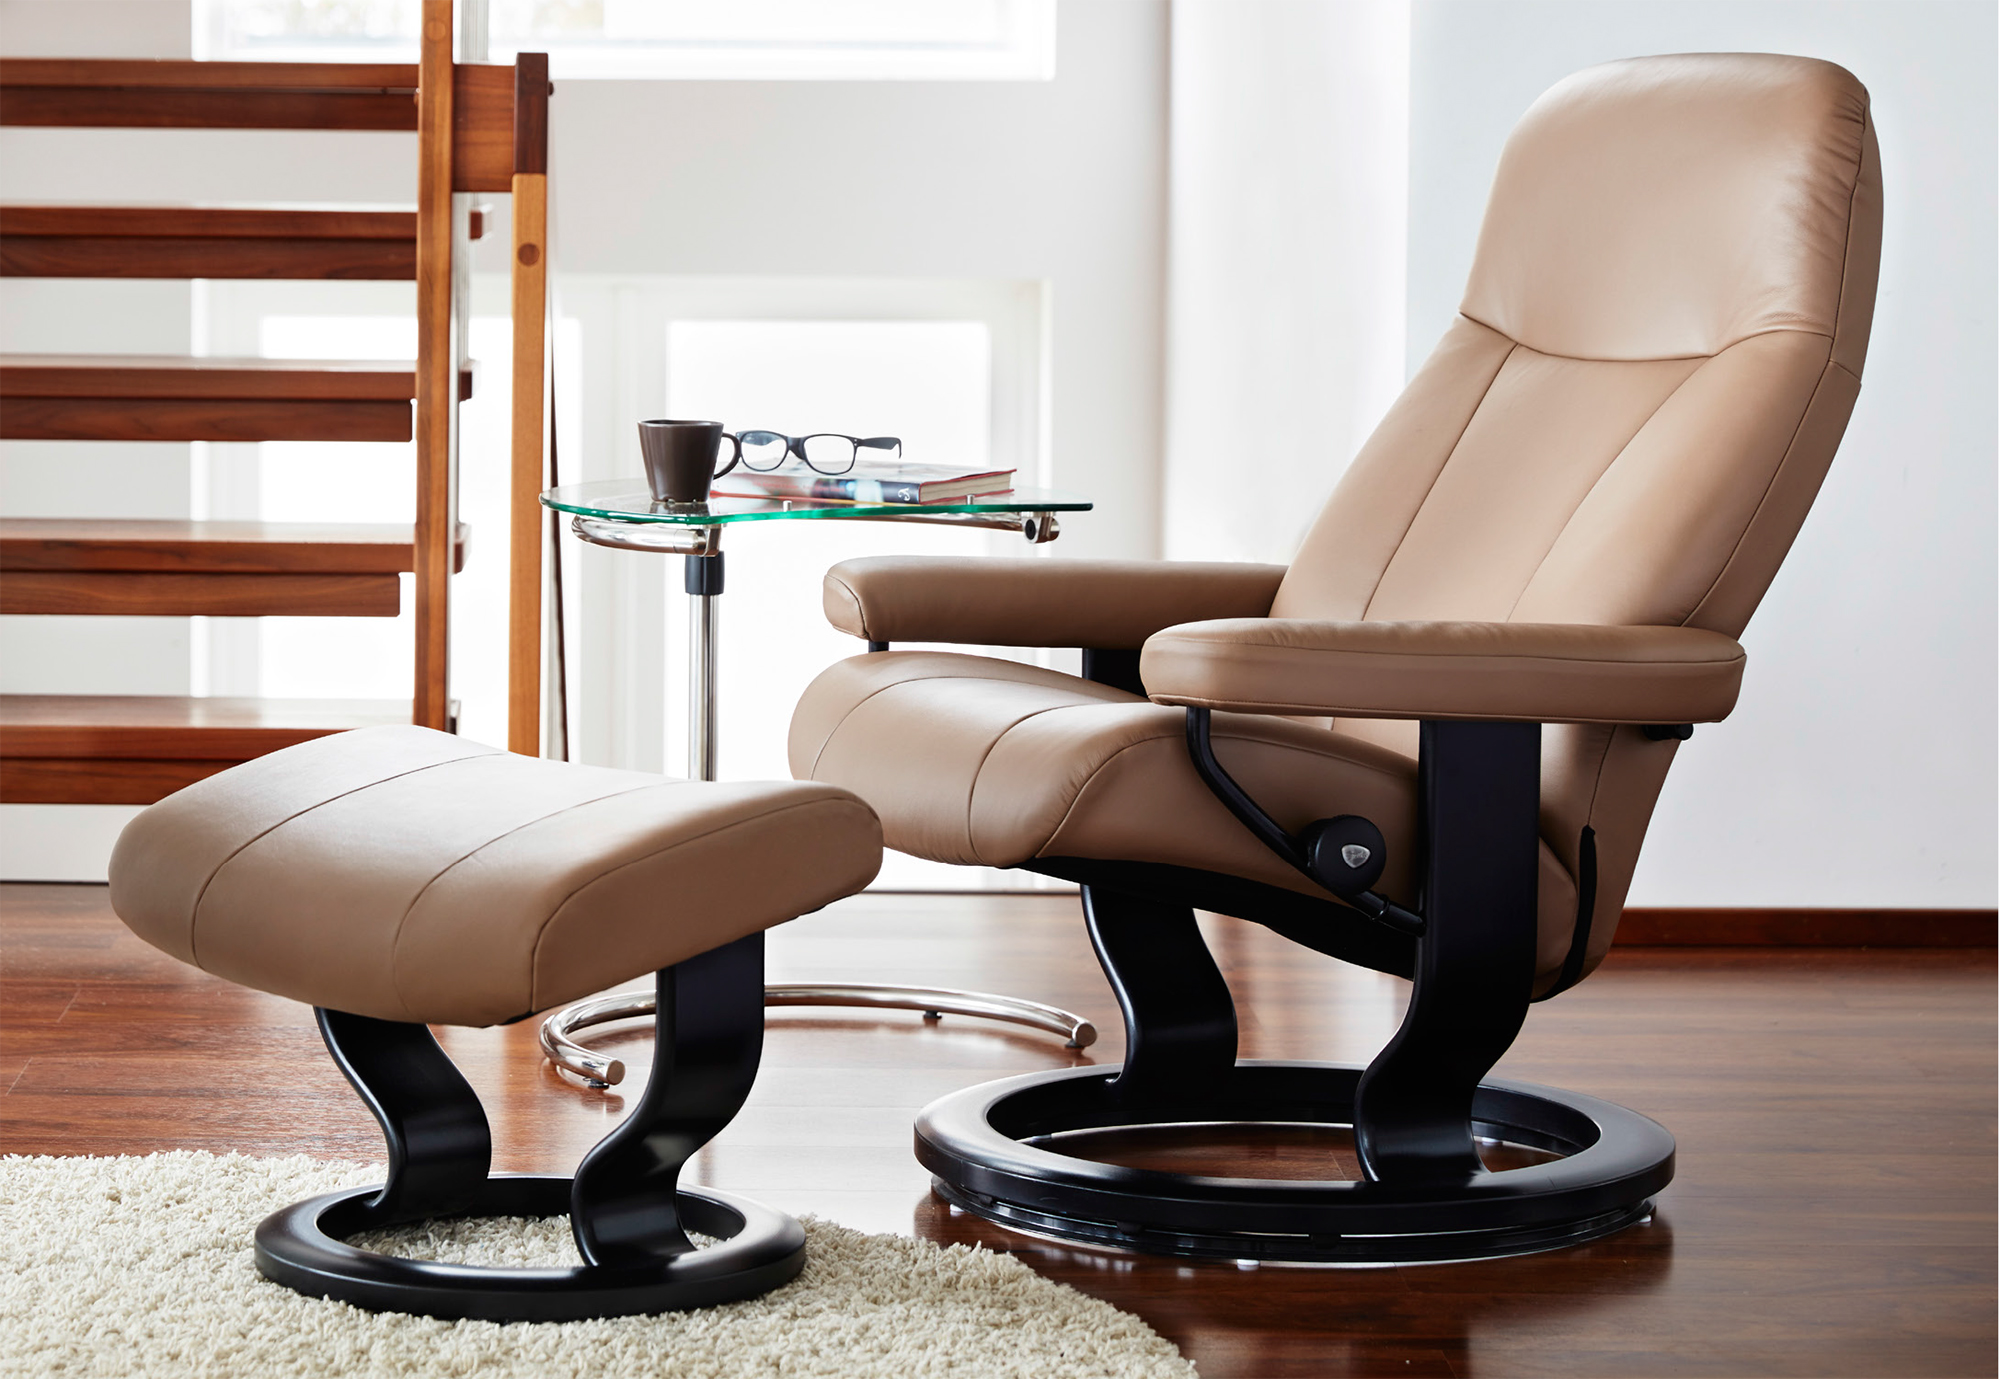 Stressless Garda Recliner Chair and Ottoman by Ekornes. Garda Recliner  Chair Lounger Ergonomic